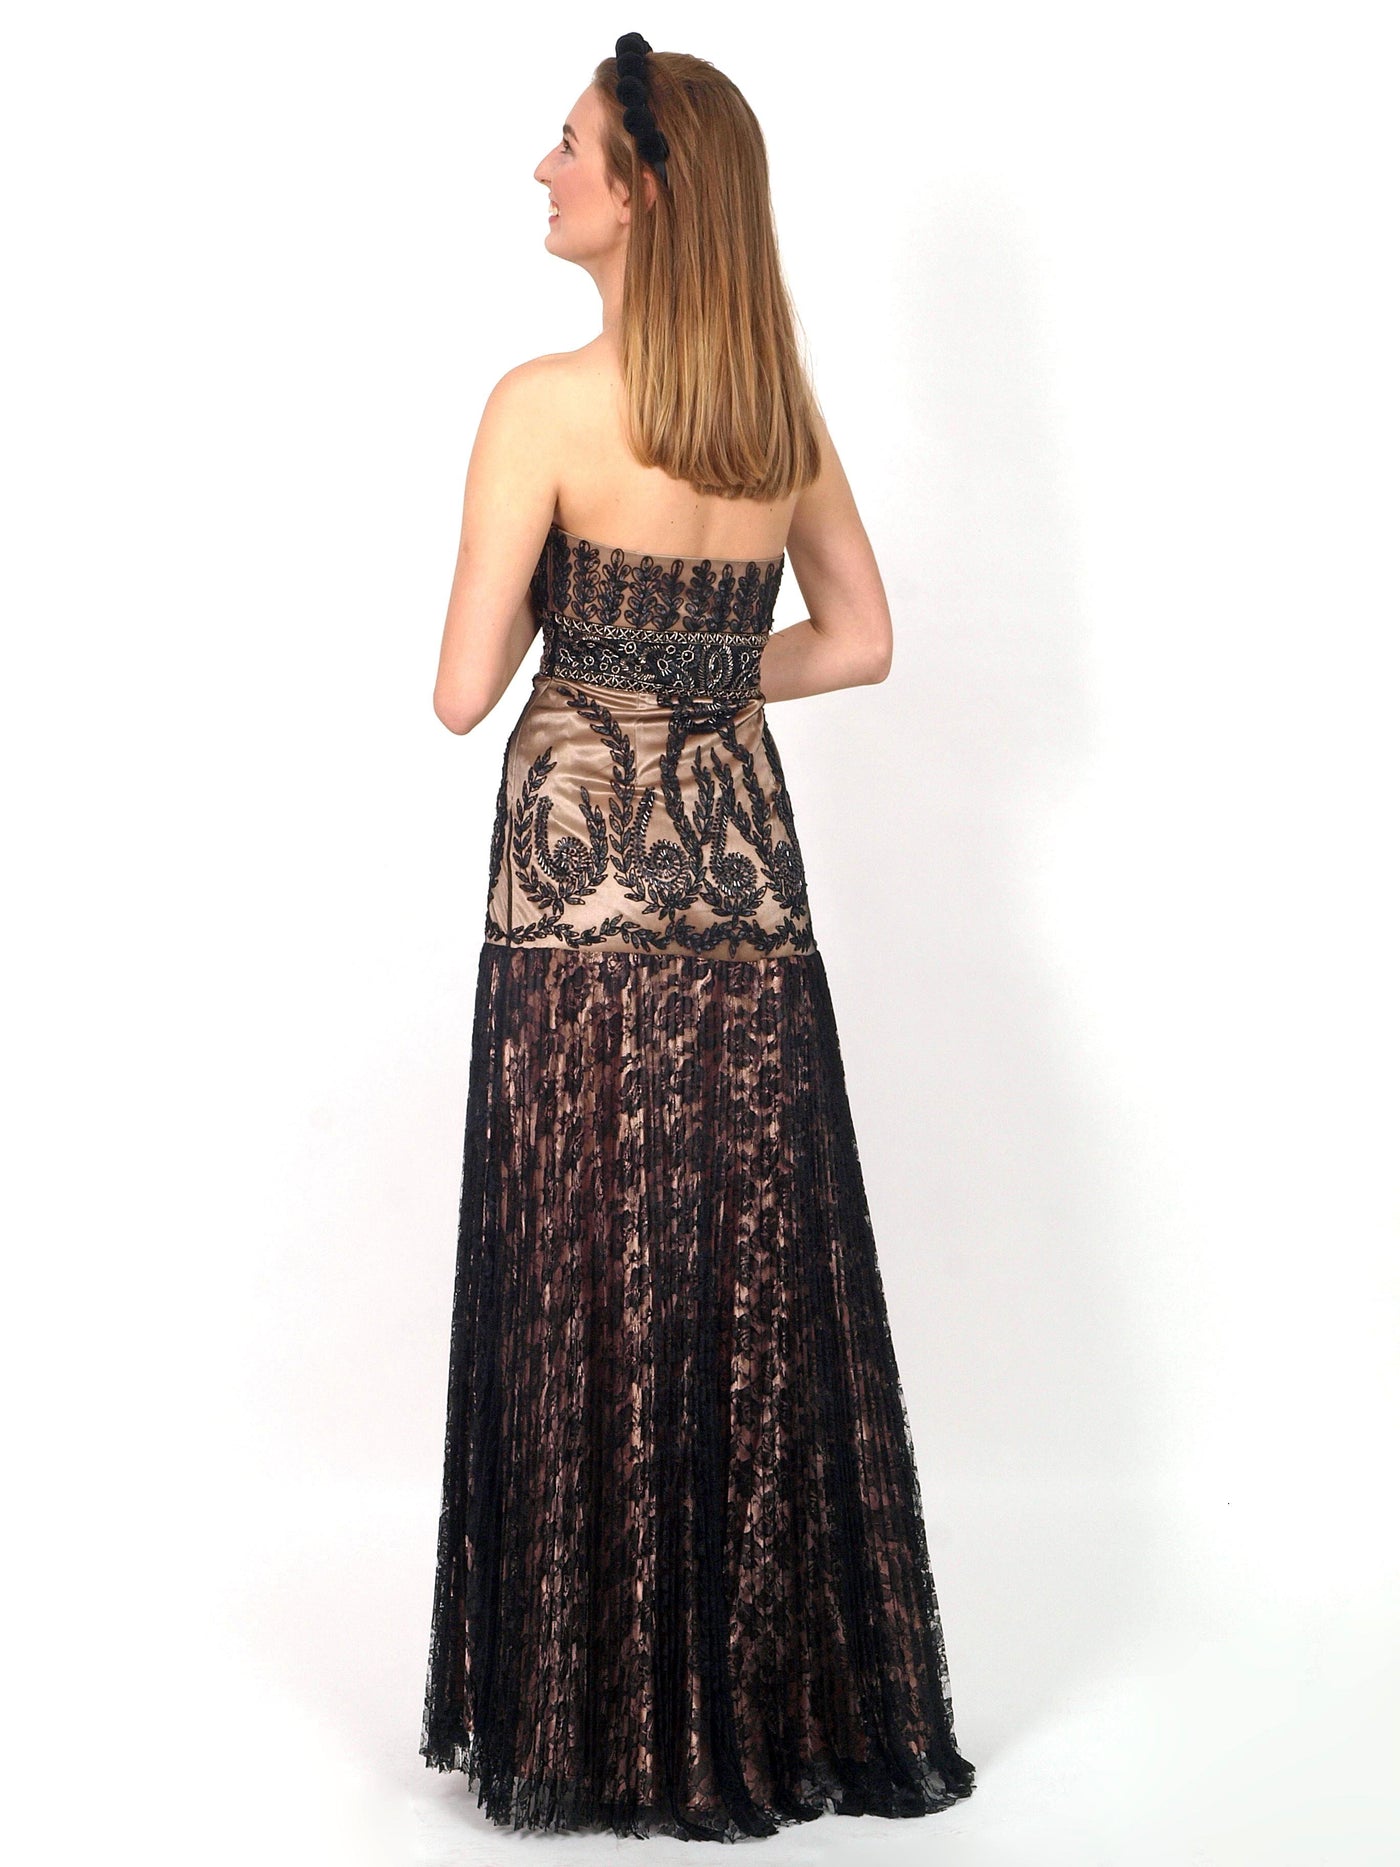 Long formal dress with black lace